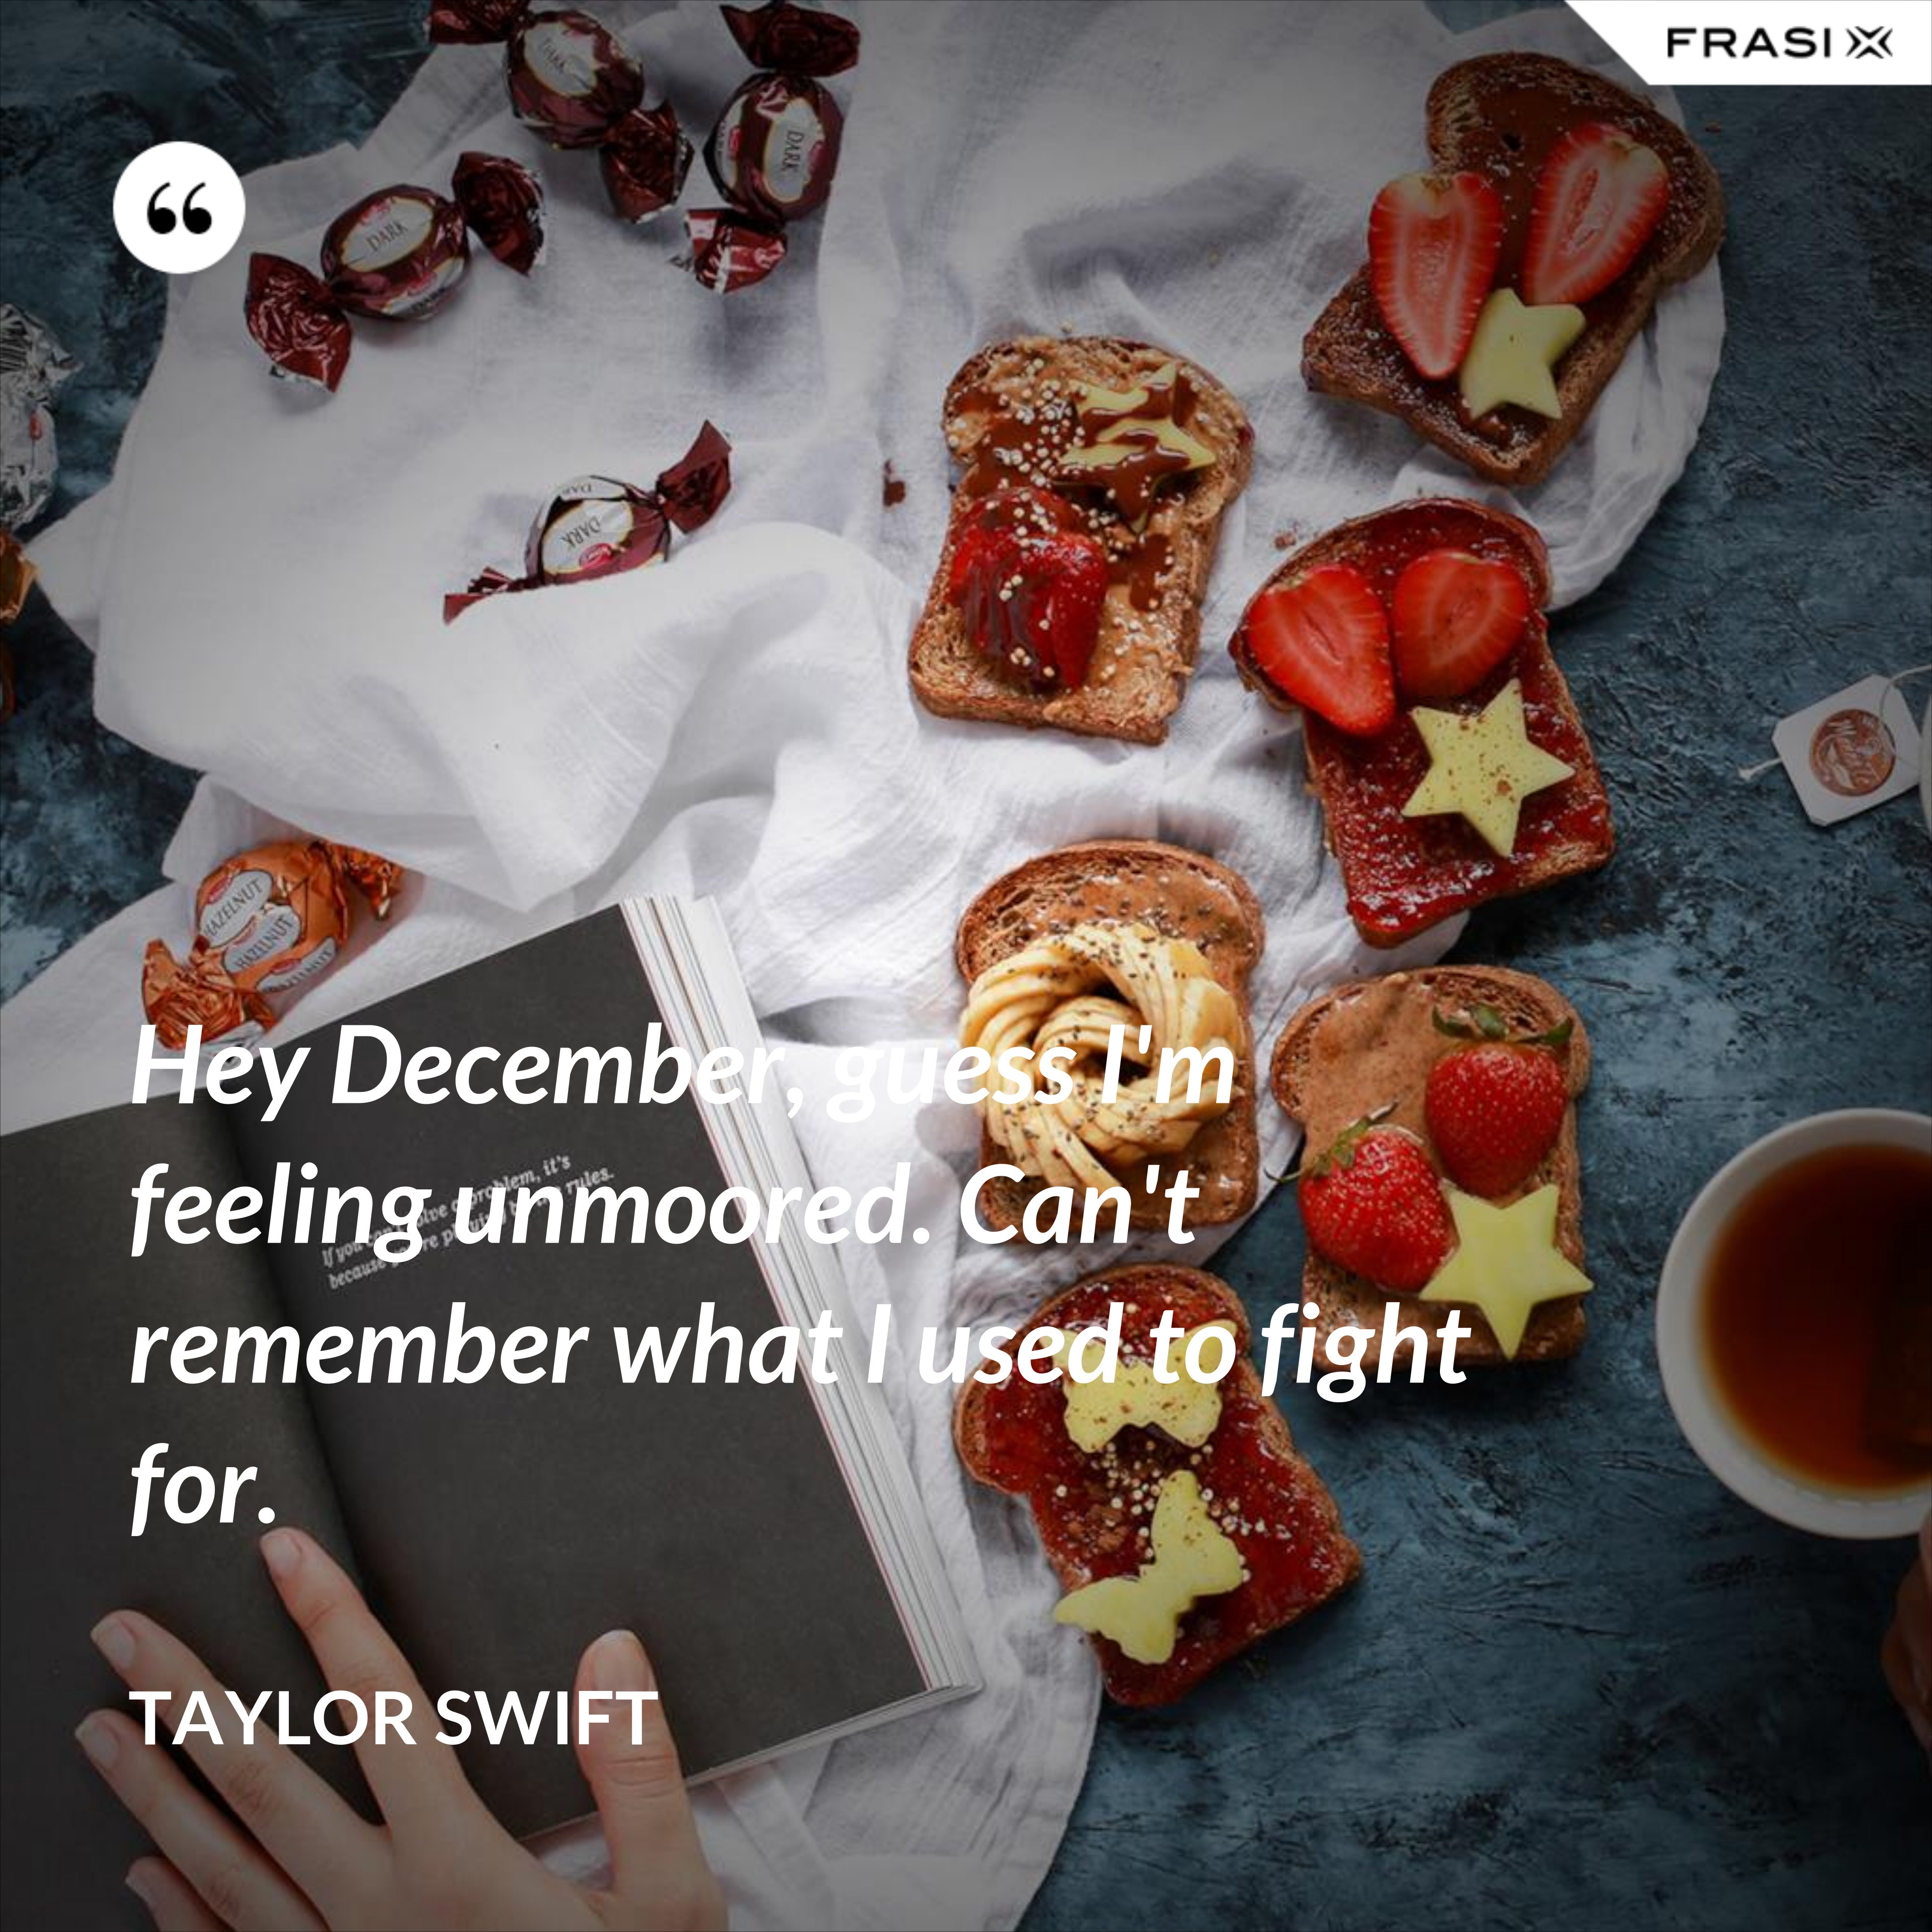 Hey December, guess I'm feeling unmoored. Can't remember what I used to fight for. - Taylor Swift